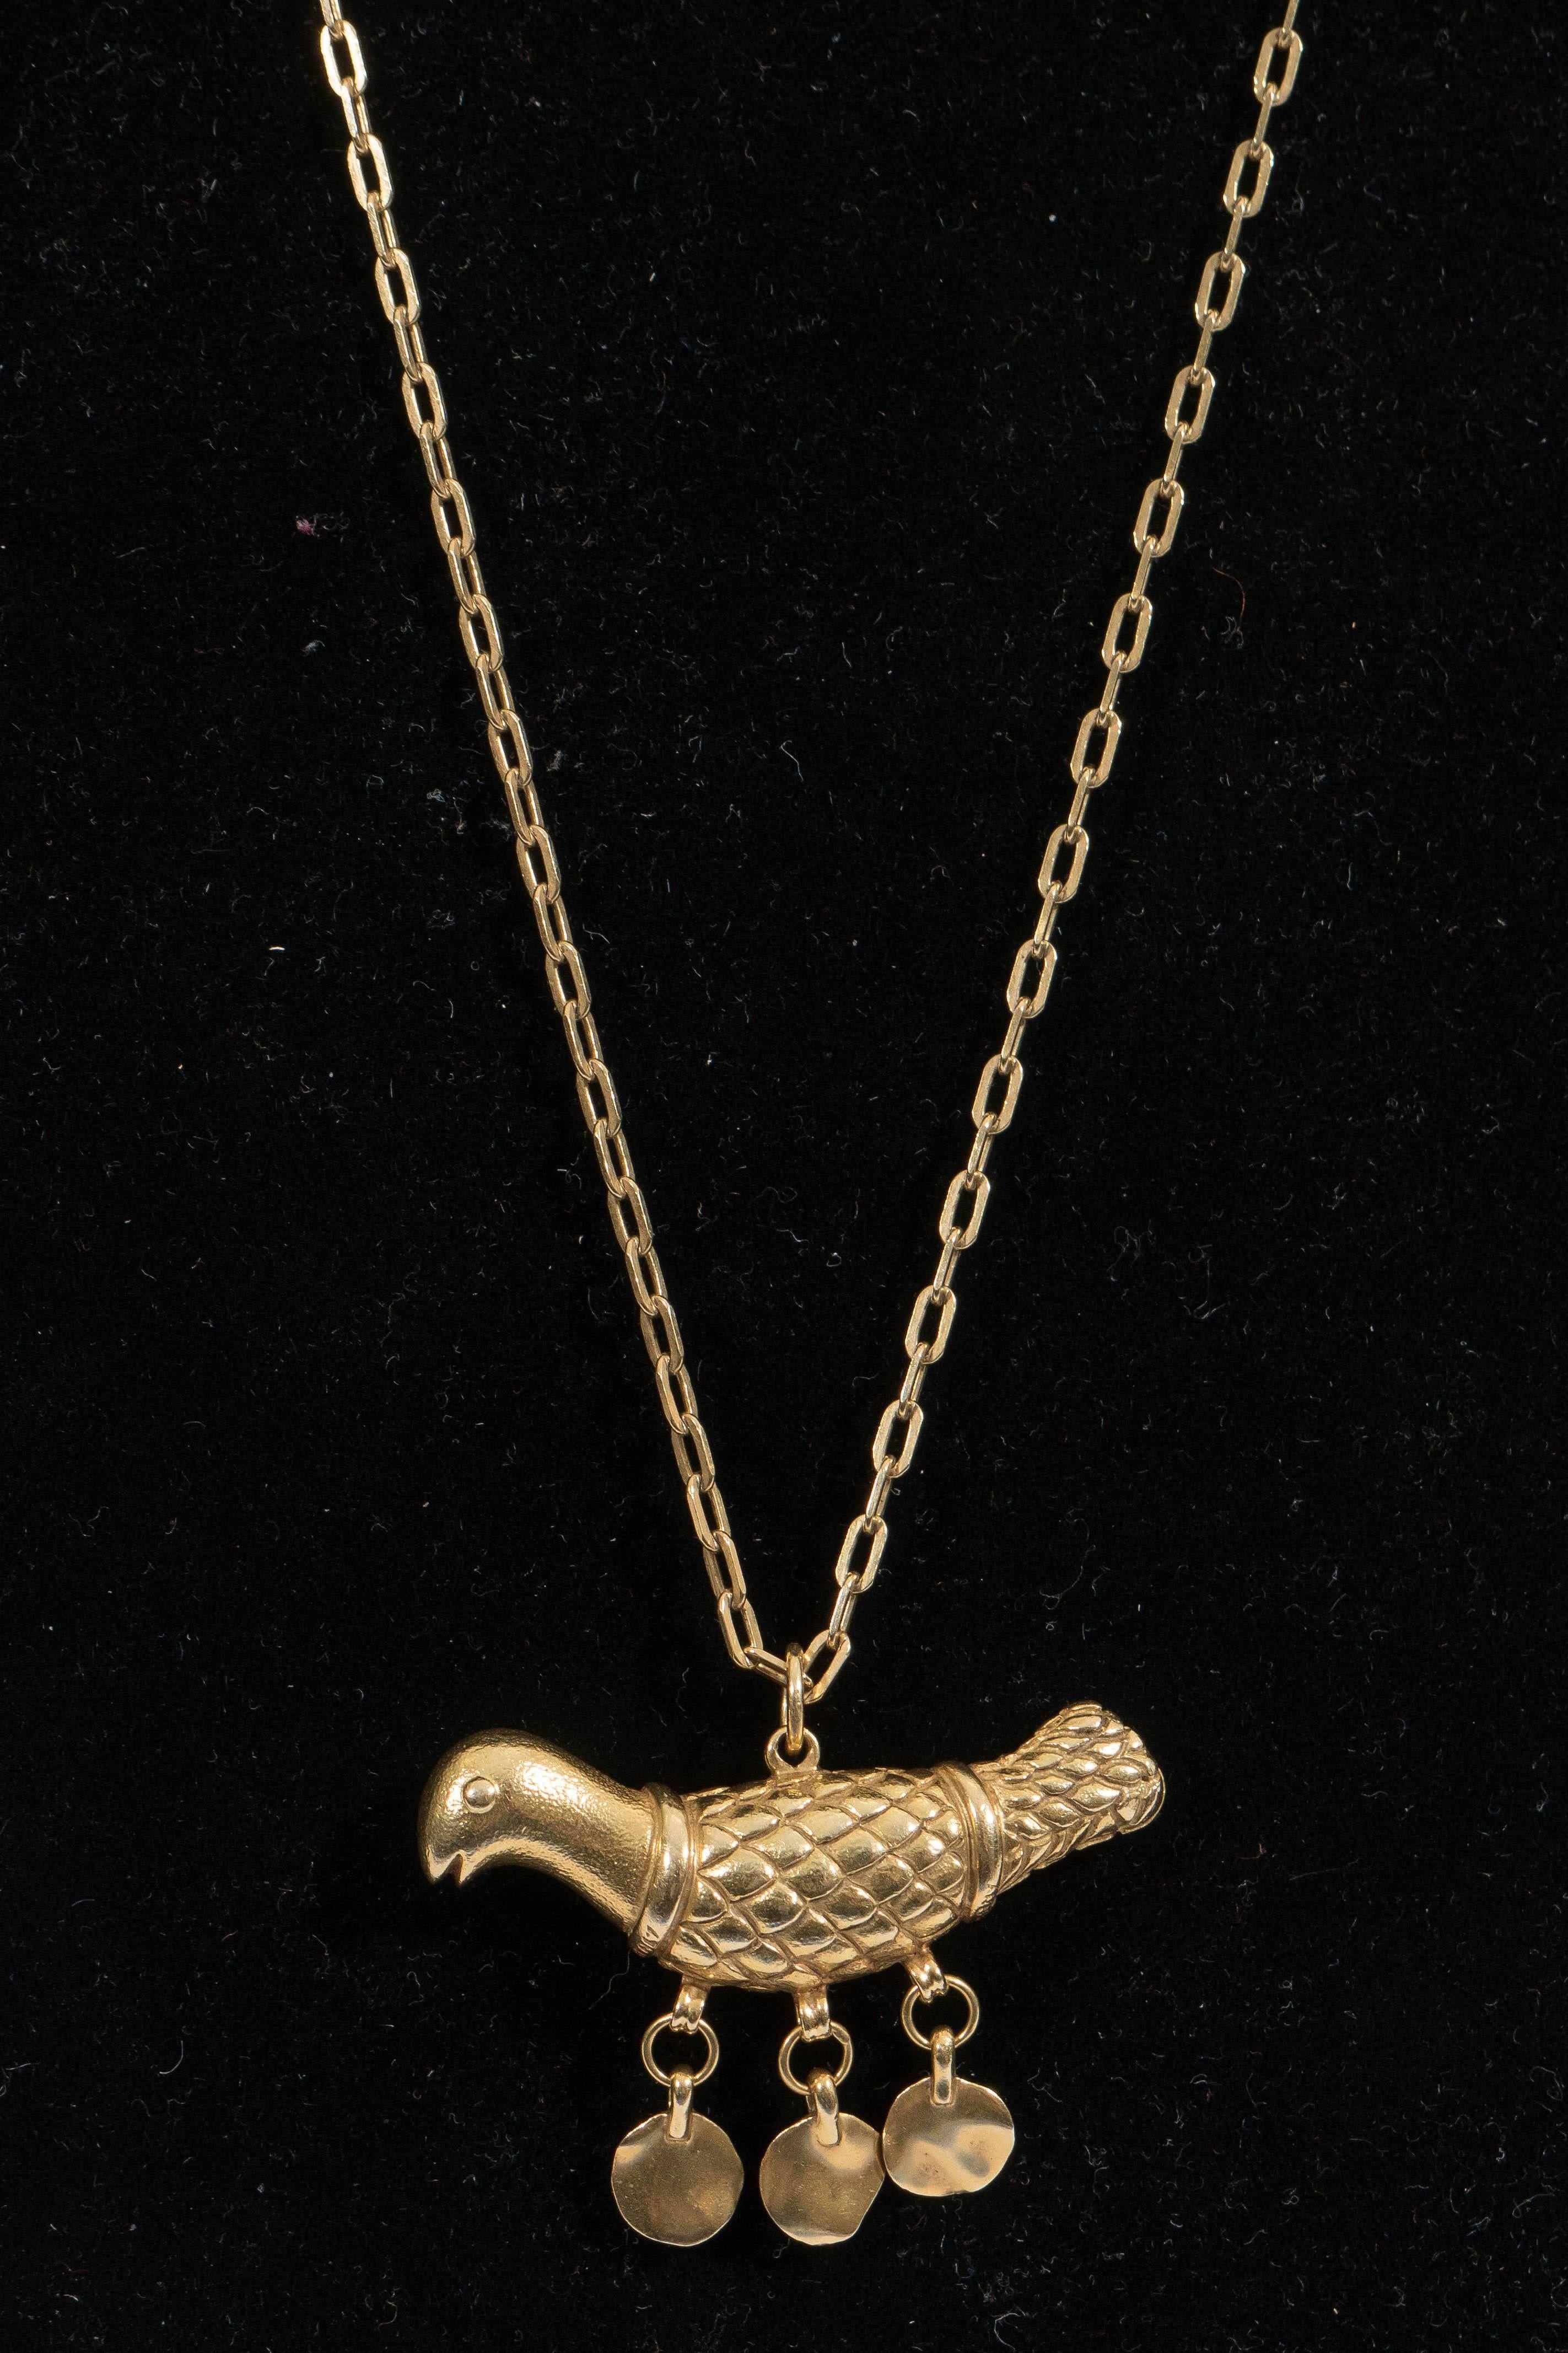 A vintage Tiffany necklace, produced in Italy, with stylistically detailed bird pendant and lengthy chain, entirely in 18-karat yellow gold, trimmed with three dangling hammered discs. Markings include [TIFFANY] and [K18 ITALY] stamped to the